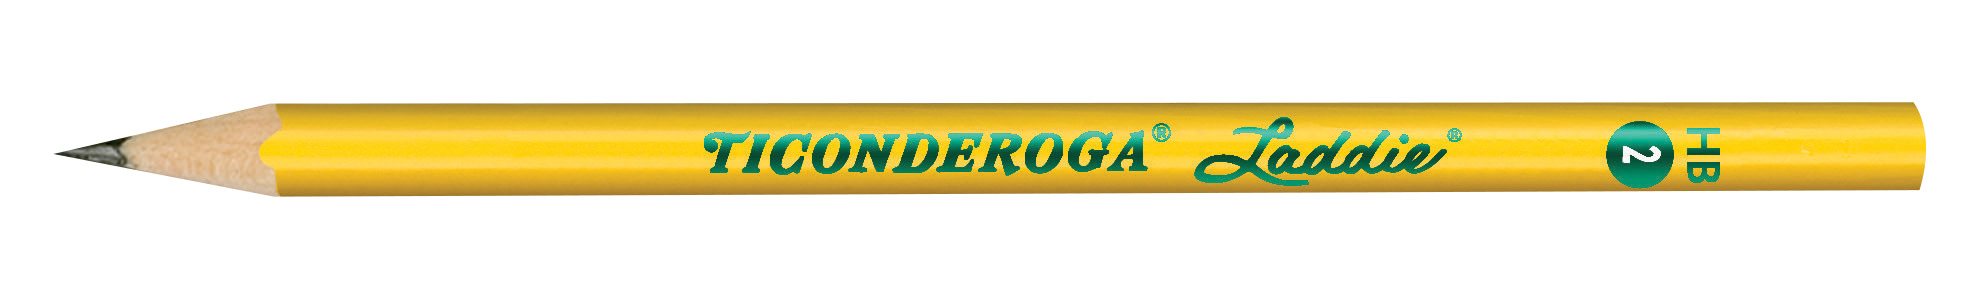 Ticonderoga Laddie Oversized Pencil Without Eraser, 11/32 Inch, Pack of 12